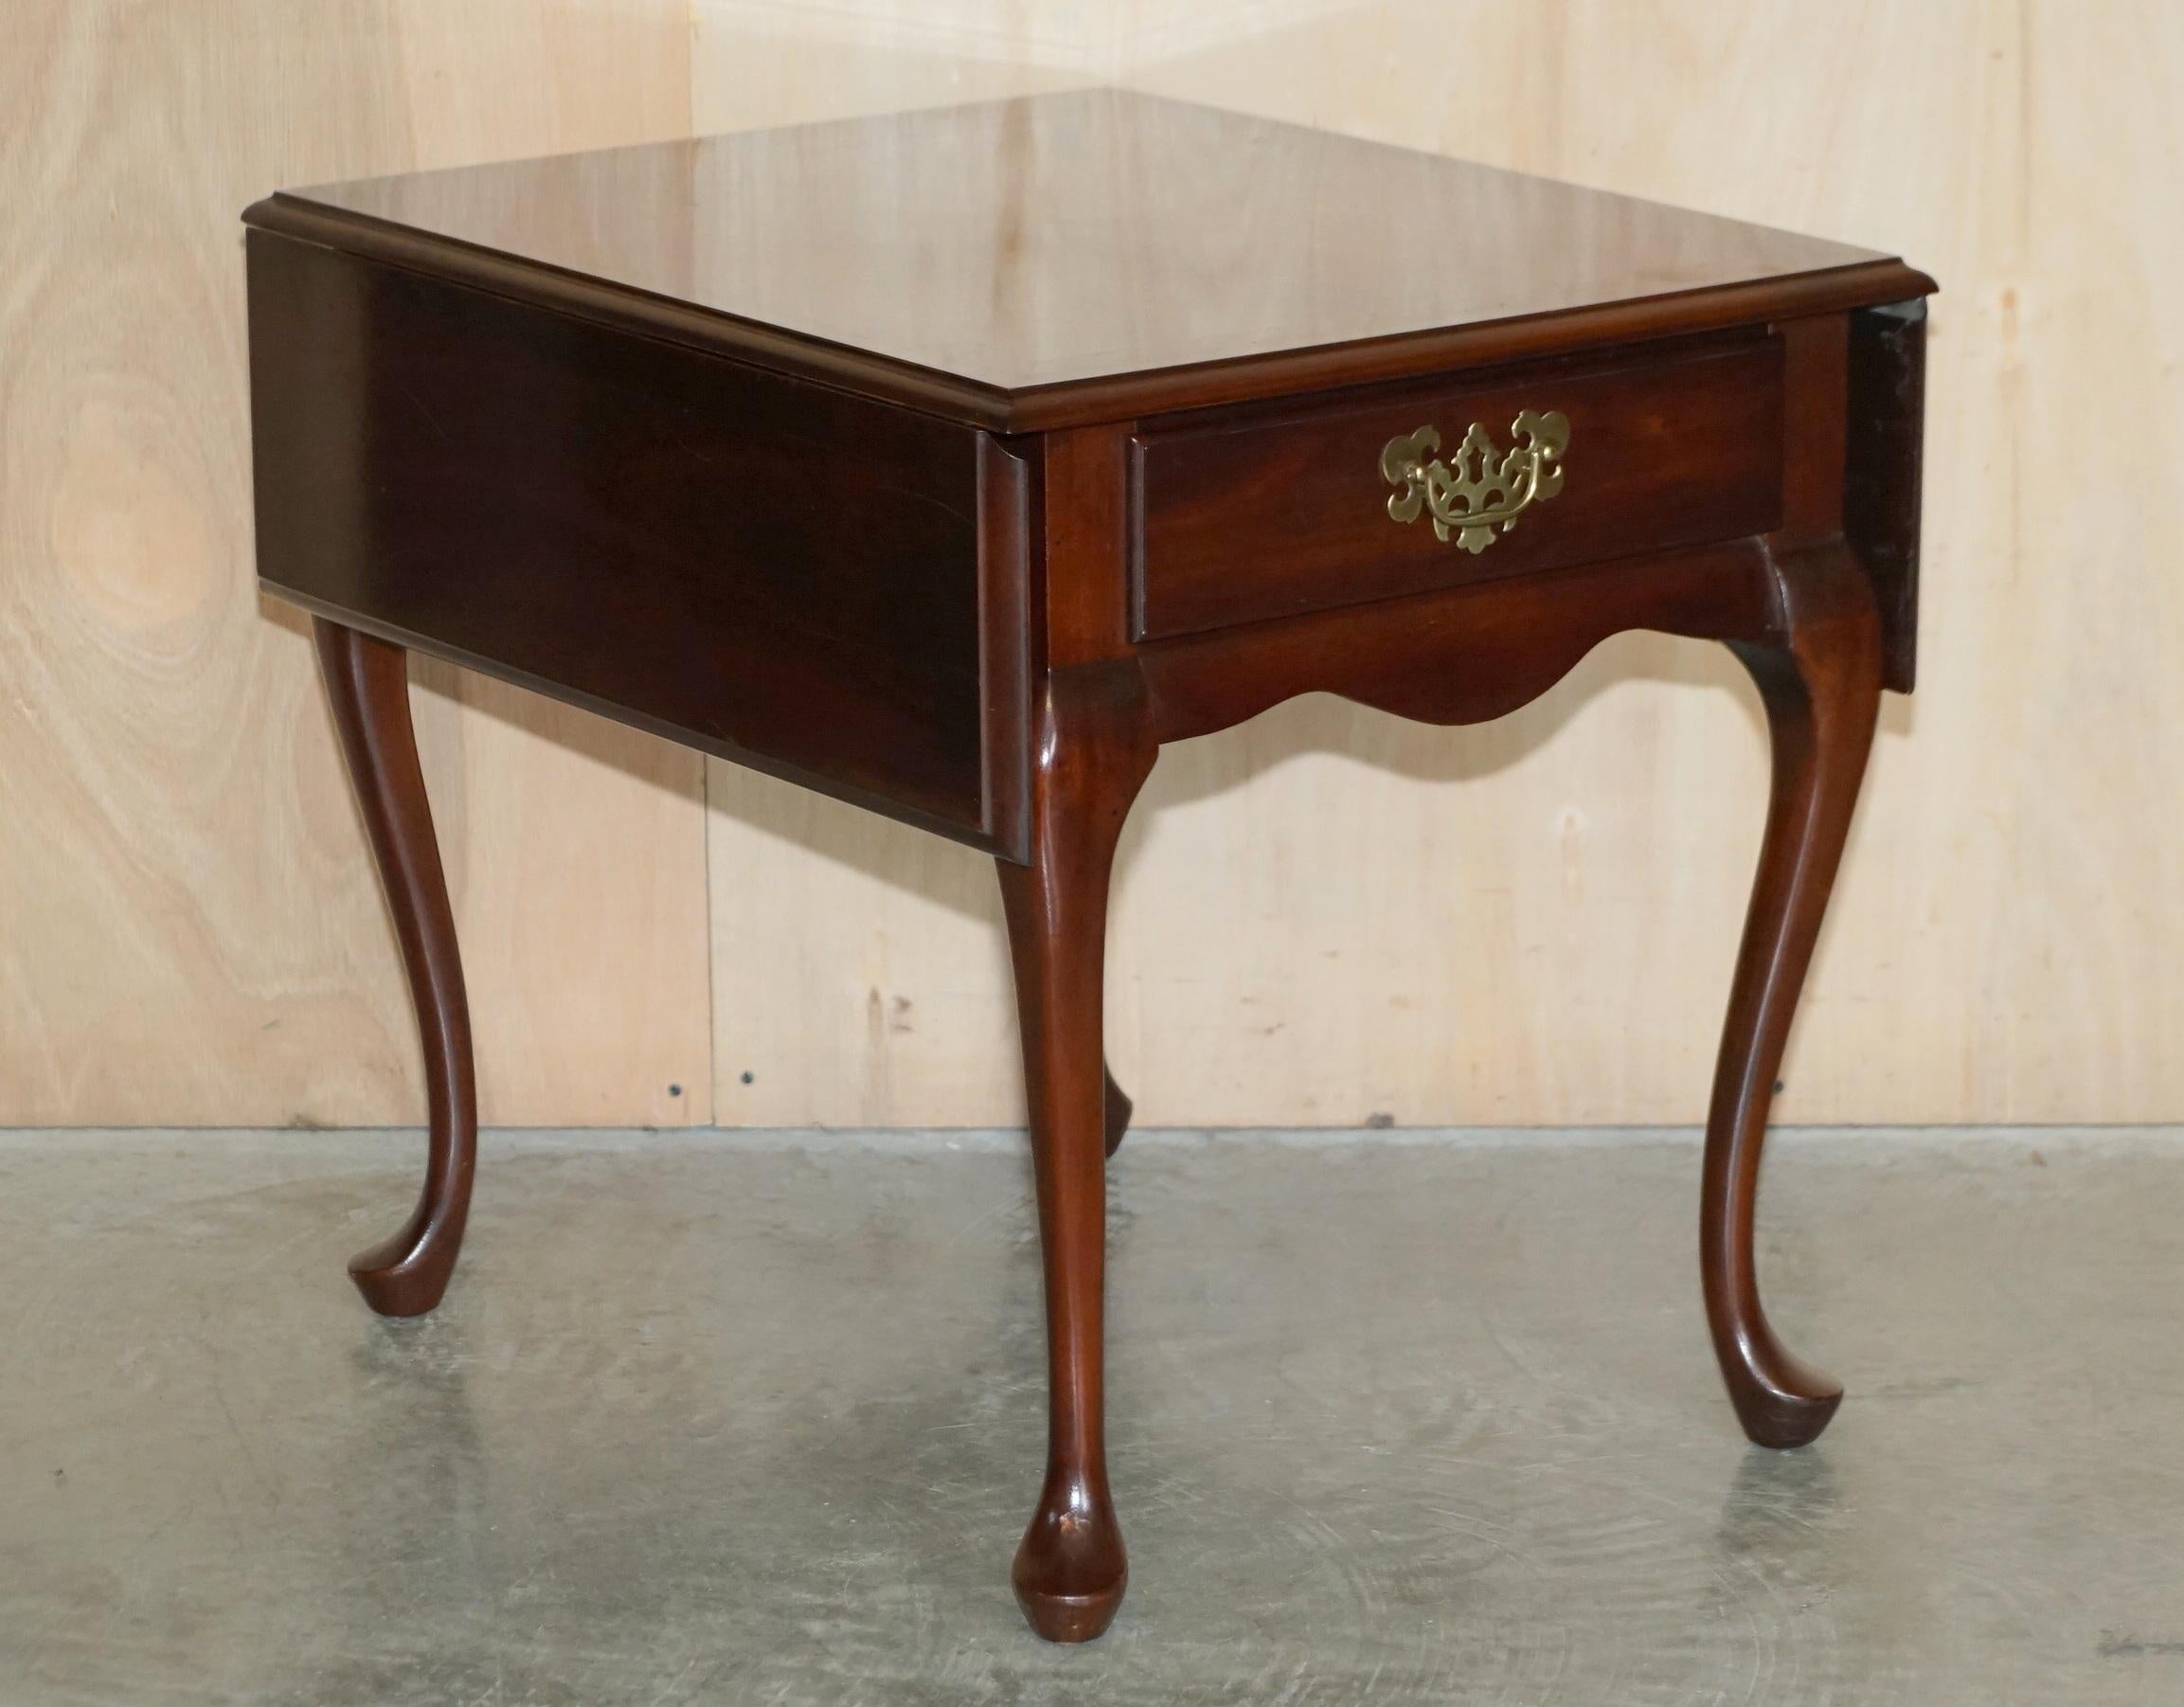 We are delighted to offer for sale this stunning pair of Chippendale style Pembroke tables which are large side table sized, in Mahogany with brass handles made by Mersman Tables Somers Corporation.

These are a very good looking and well made